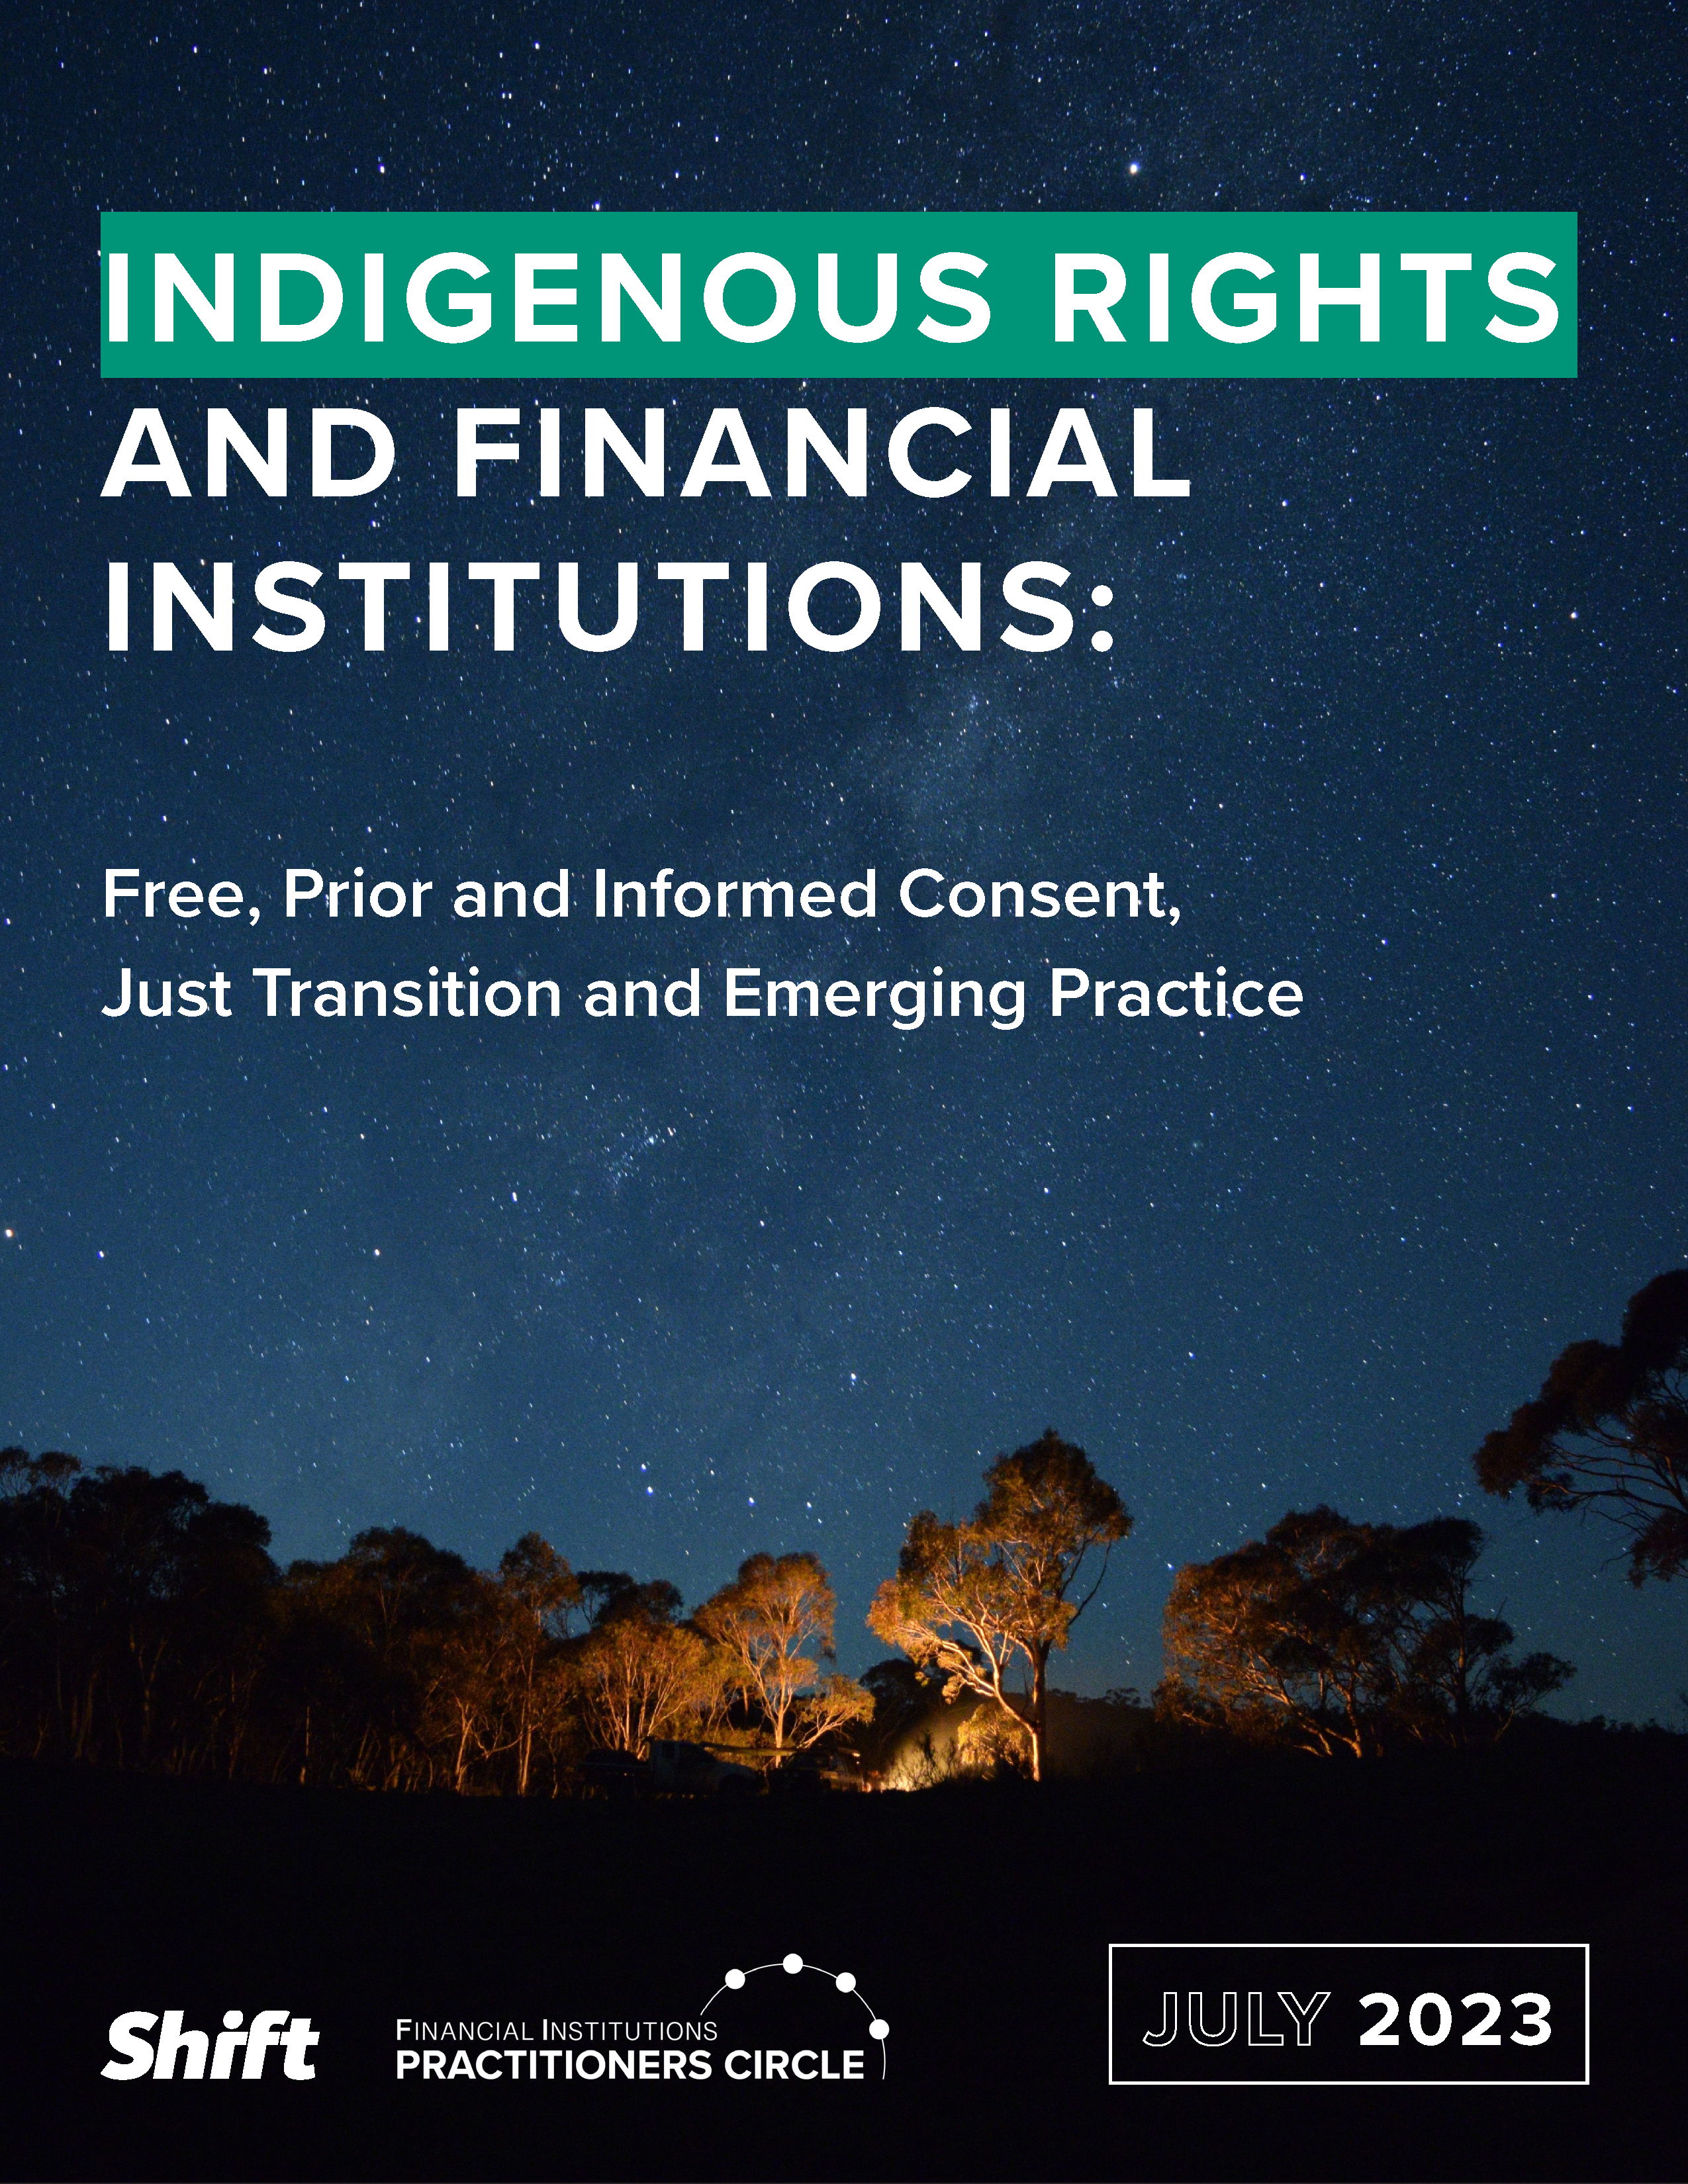 Indigenous Rights and Financial Institutions: Free, Prior and Informed Consent, Just Transition and Emerging Practice